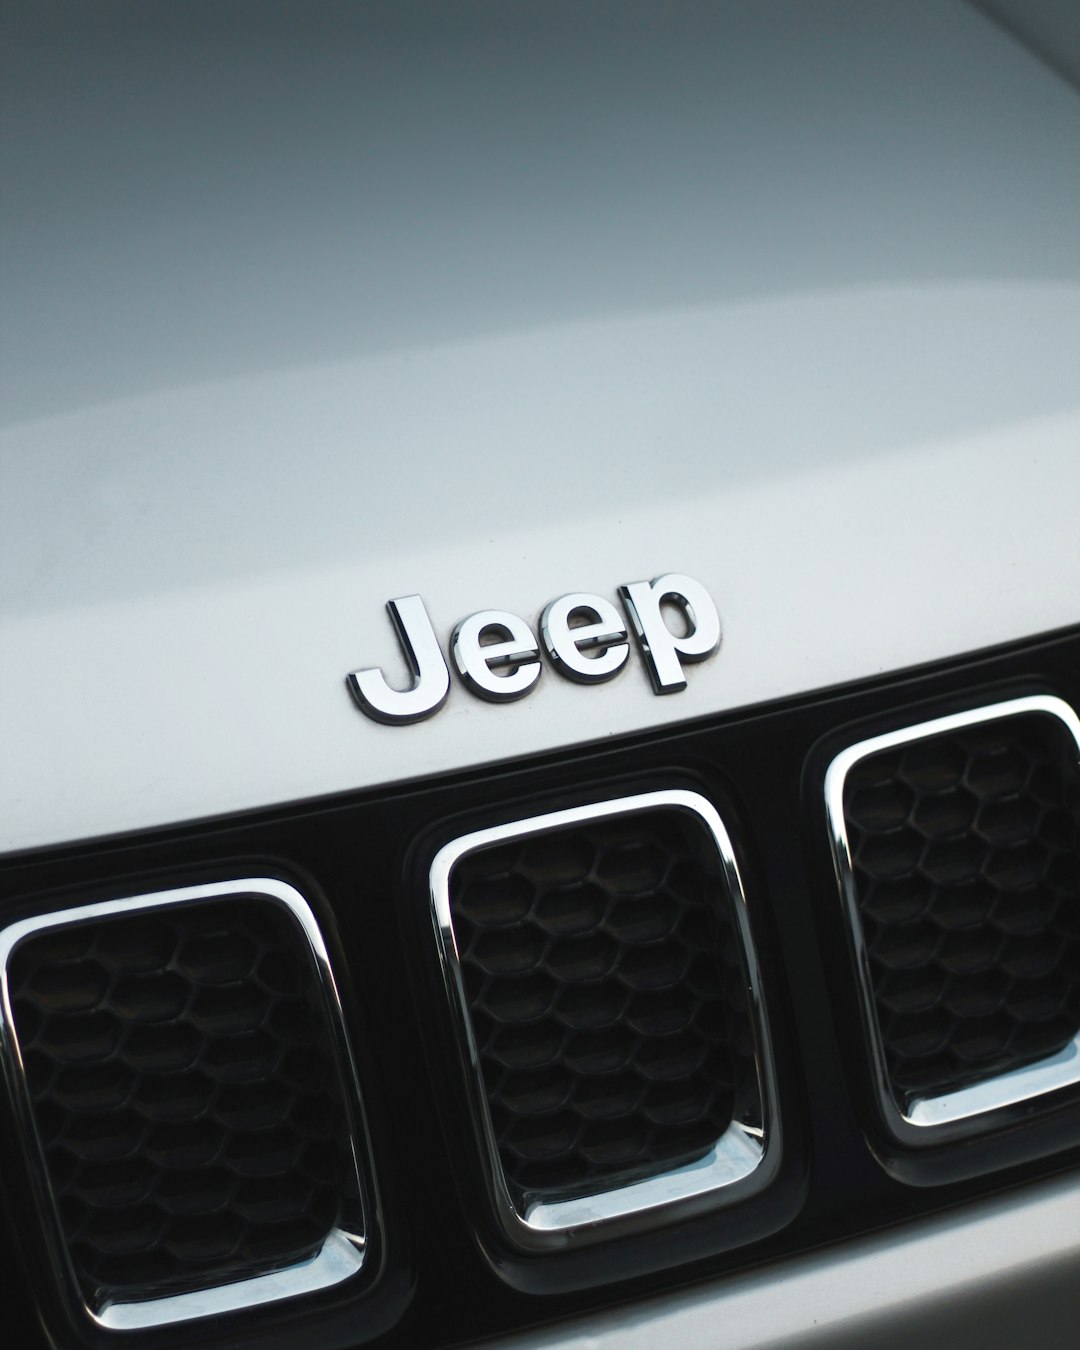 The Jeep Cherokee is a versatile and rugged SUV that offers great off-road capabilities.